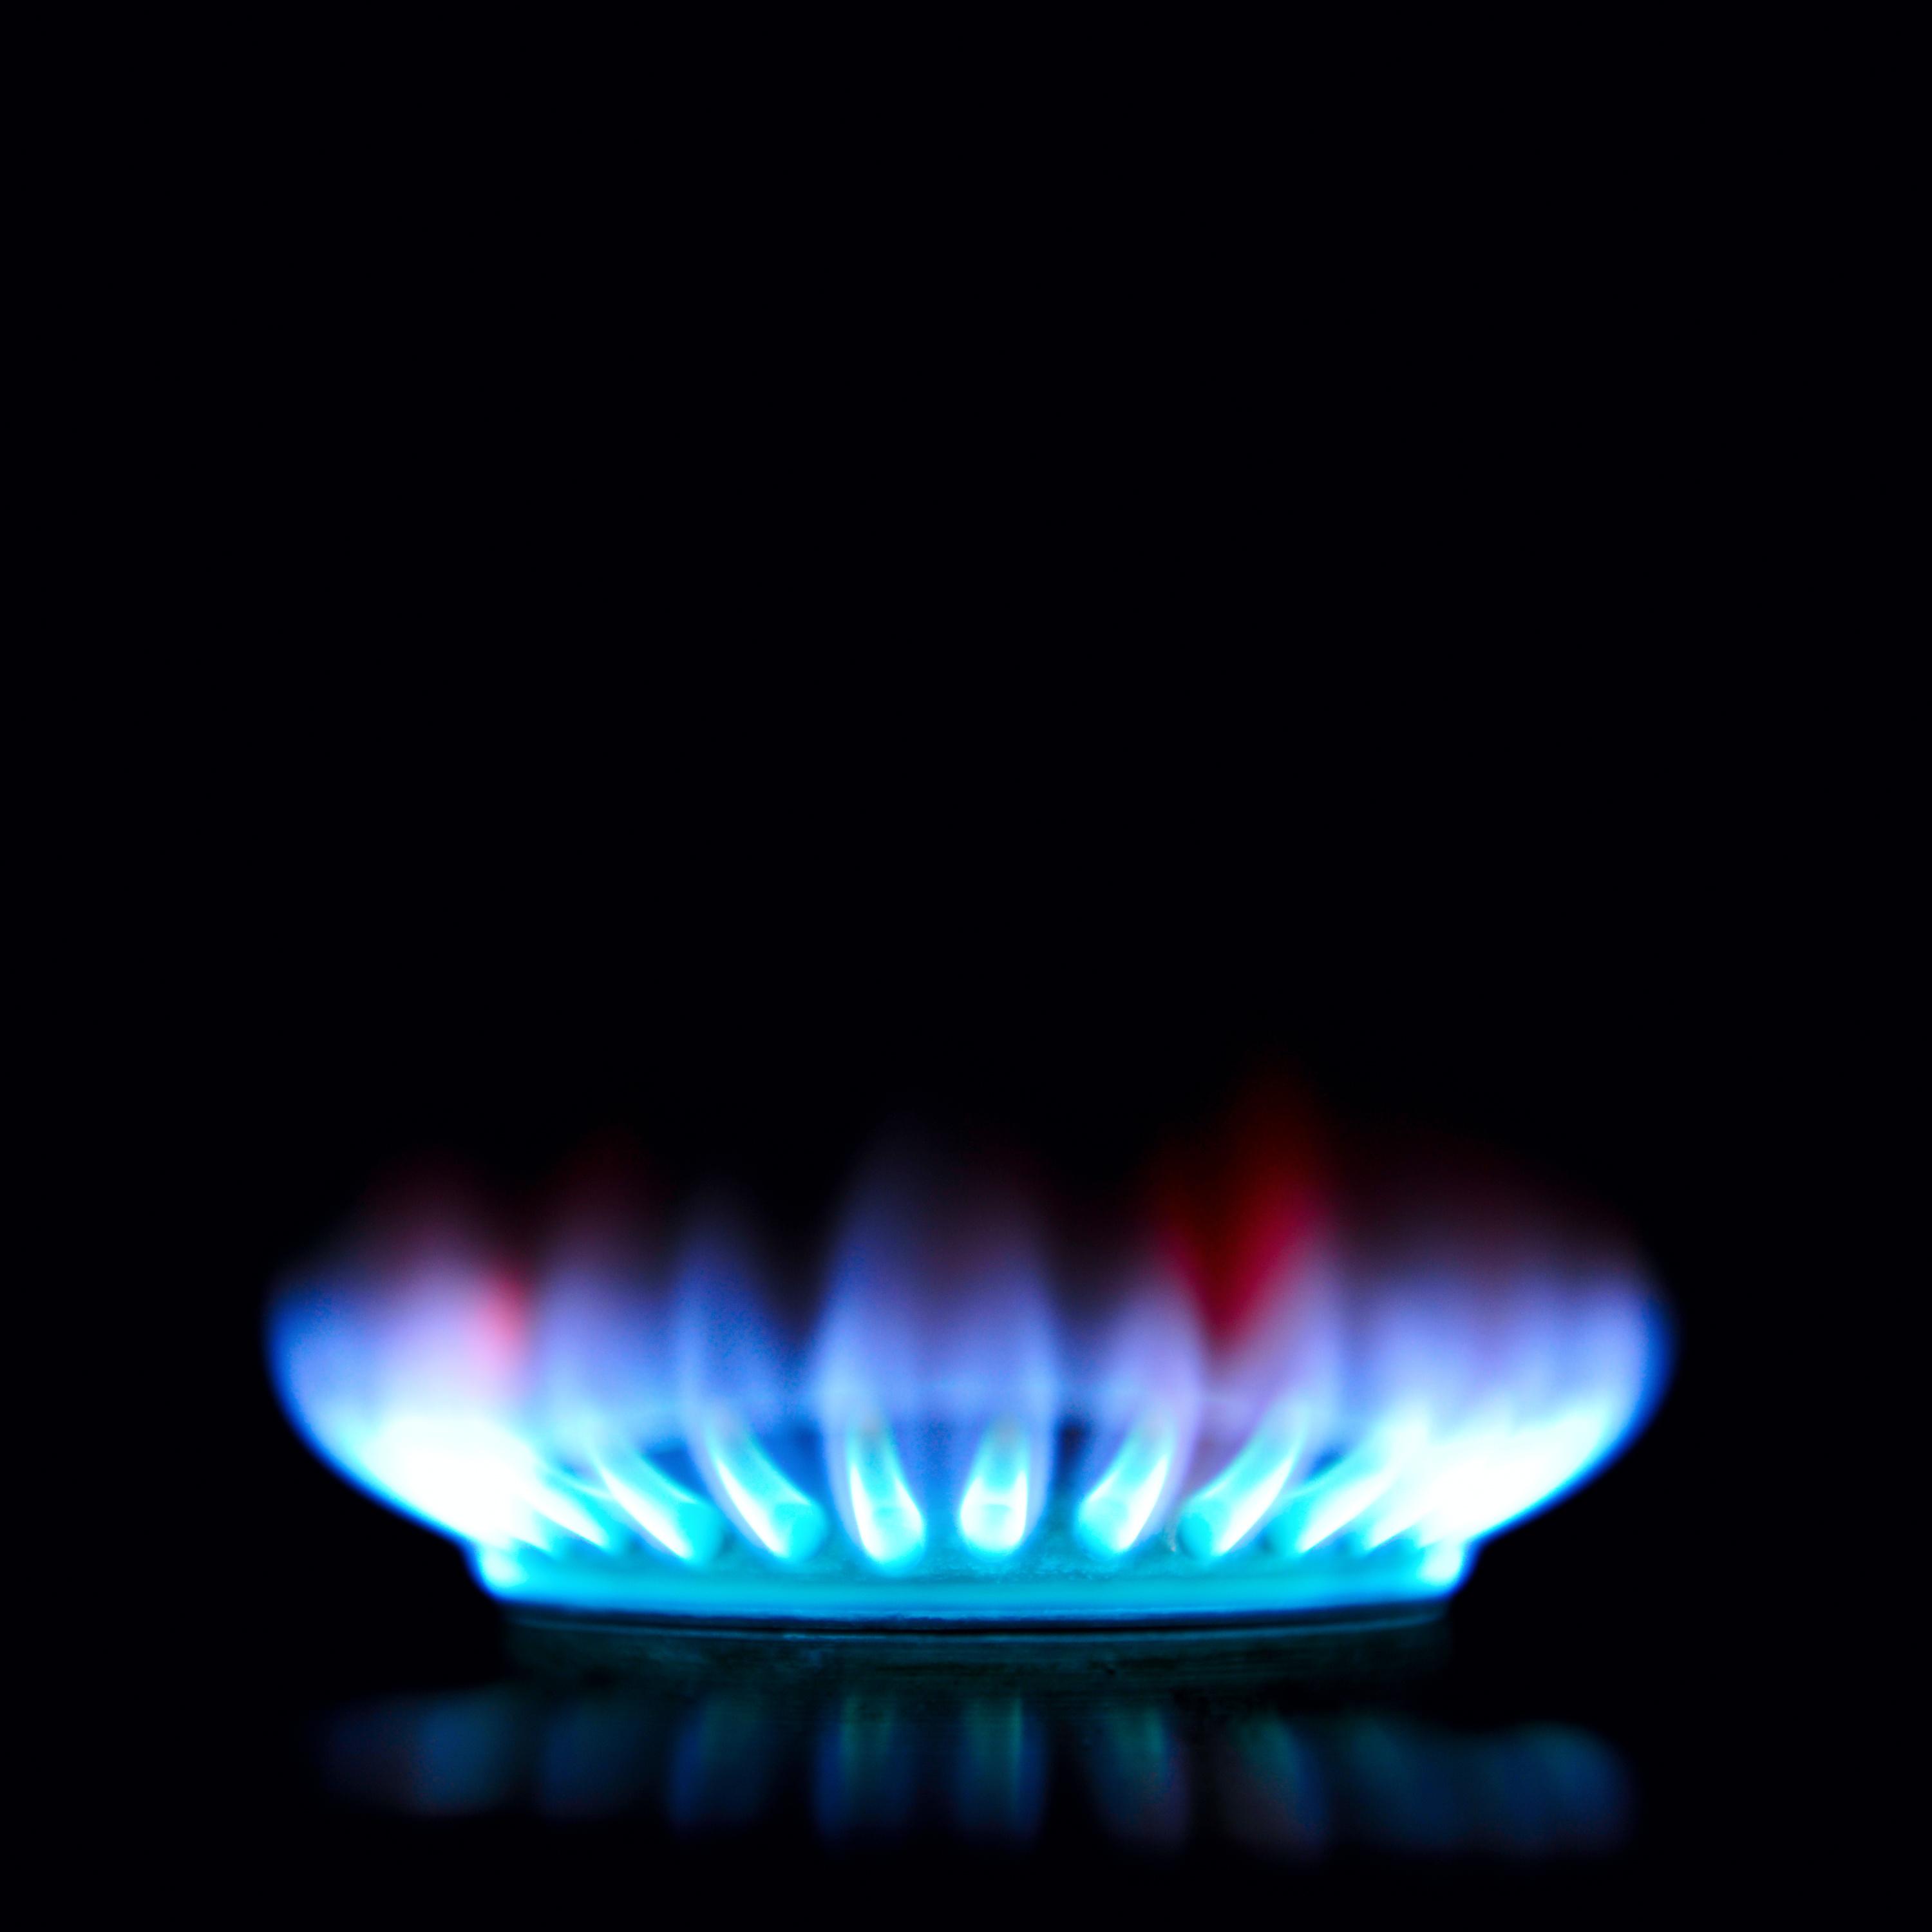 Energy suppliers